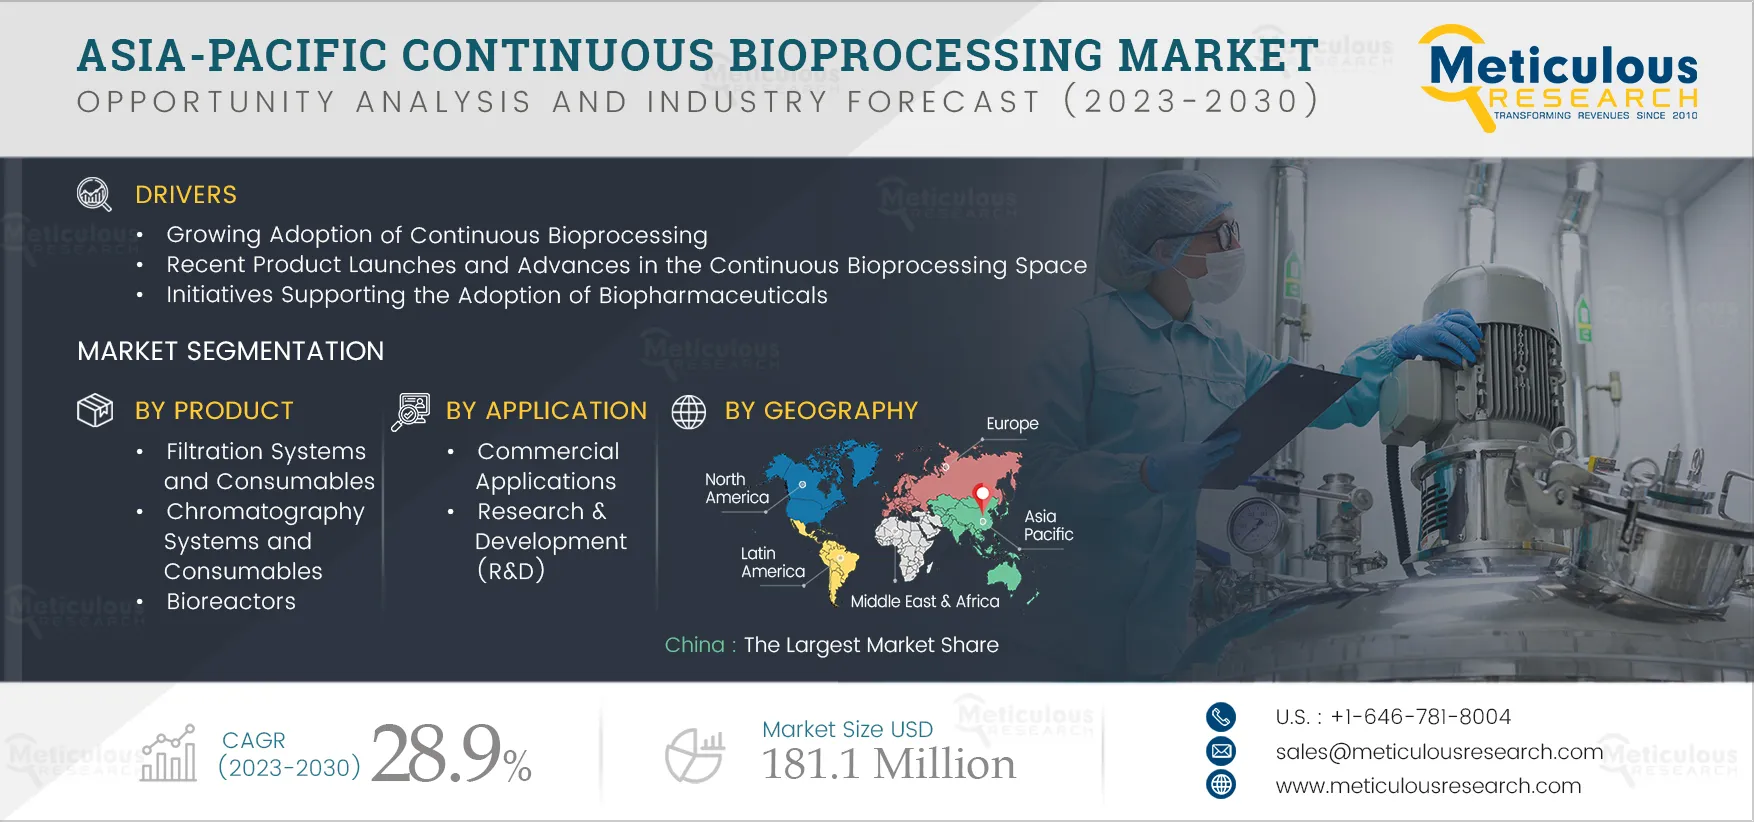 Asia-Pacific Continuous Bioprocessing Market